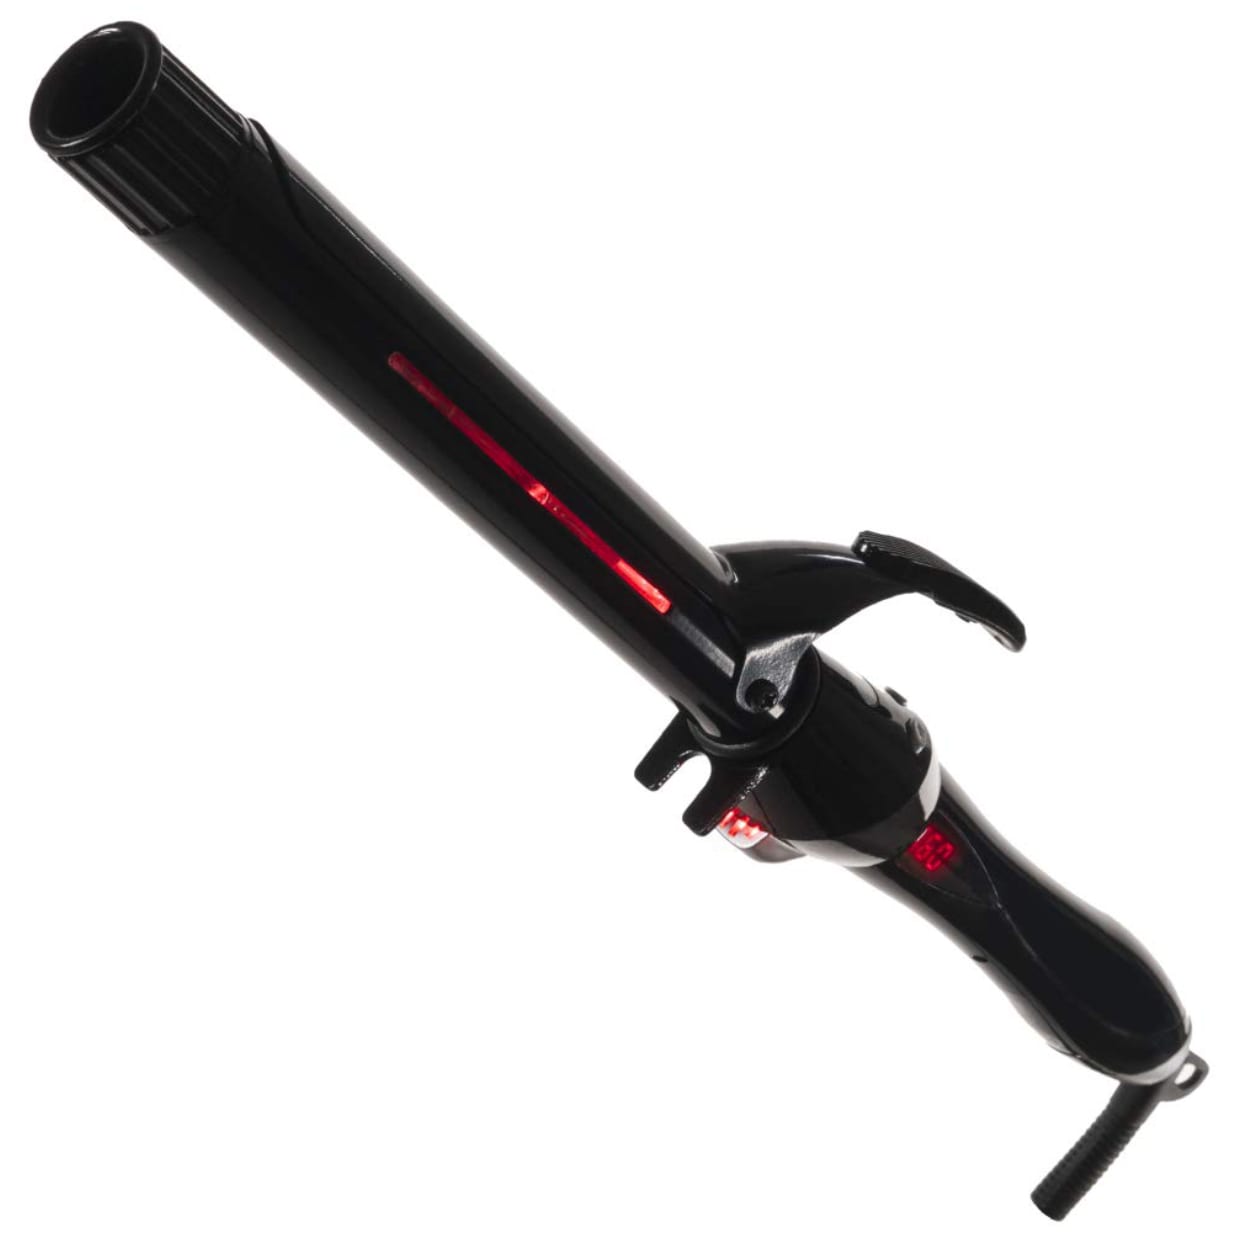 A black and red curling iron.